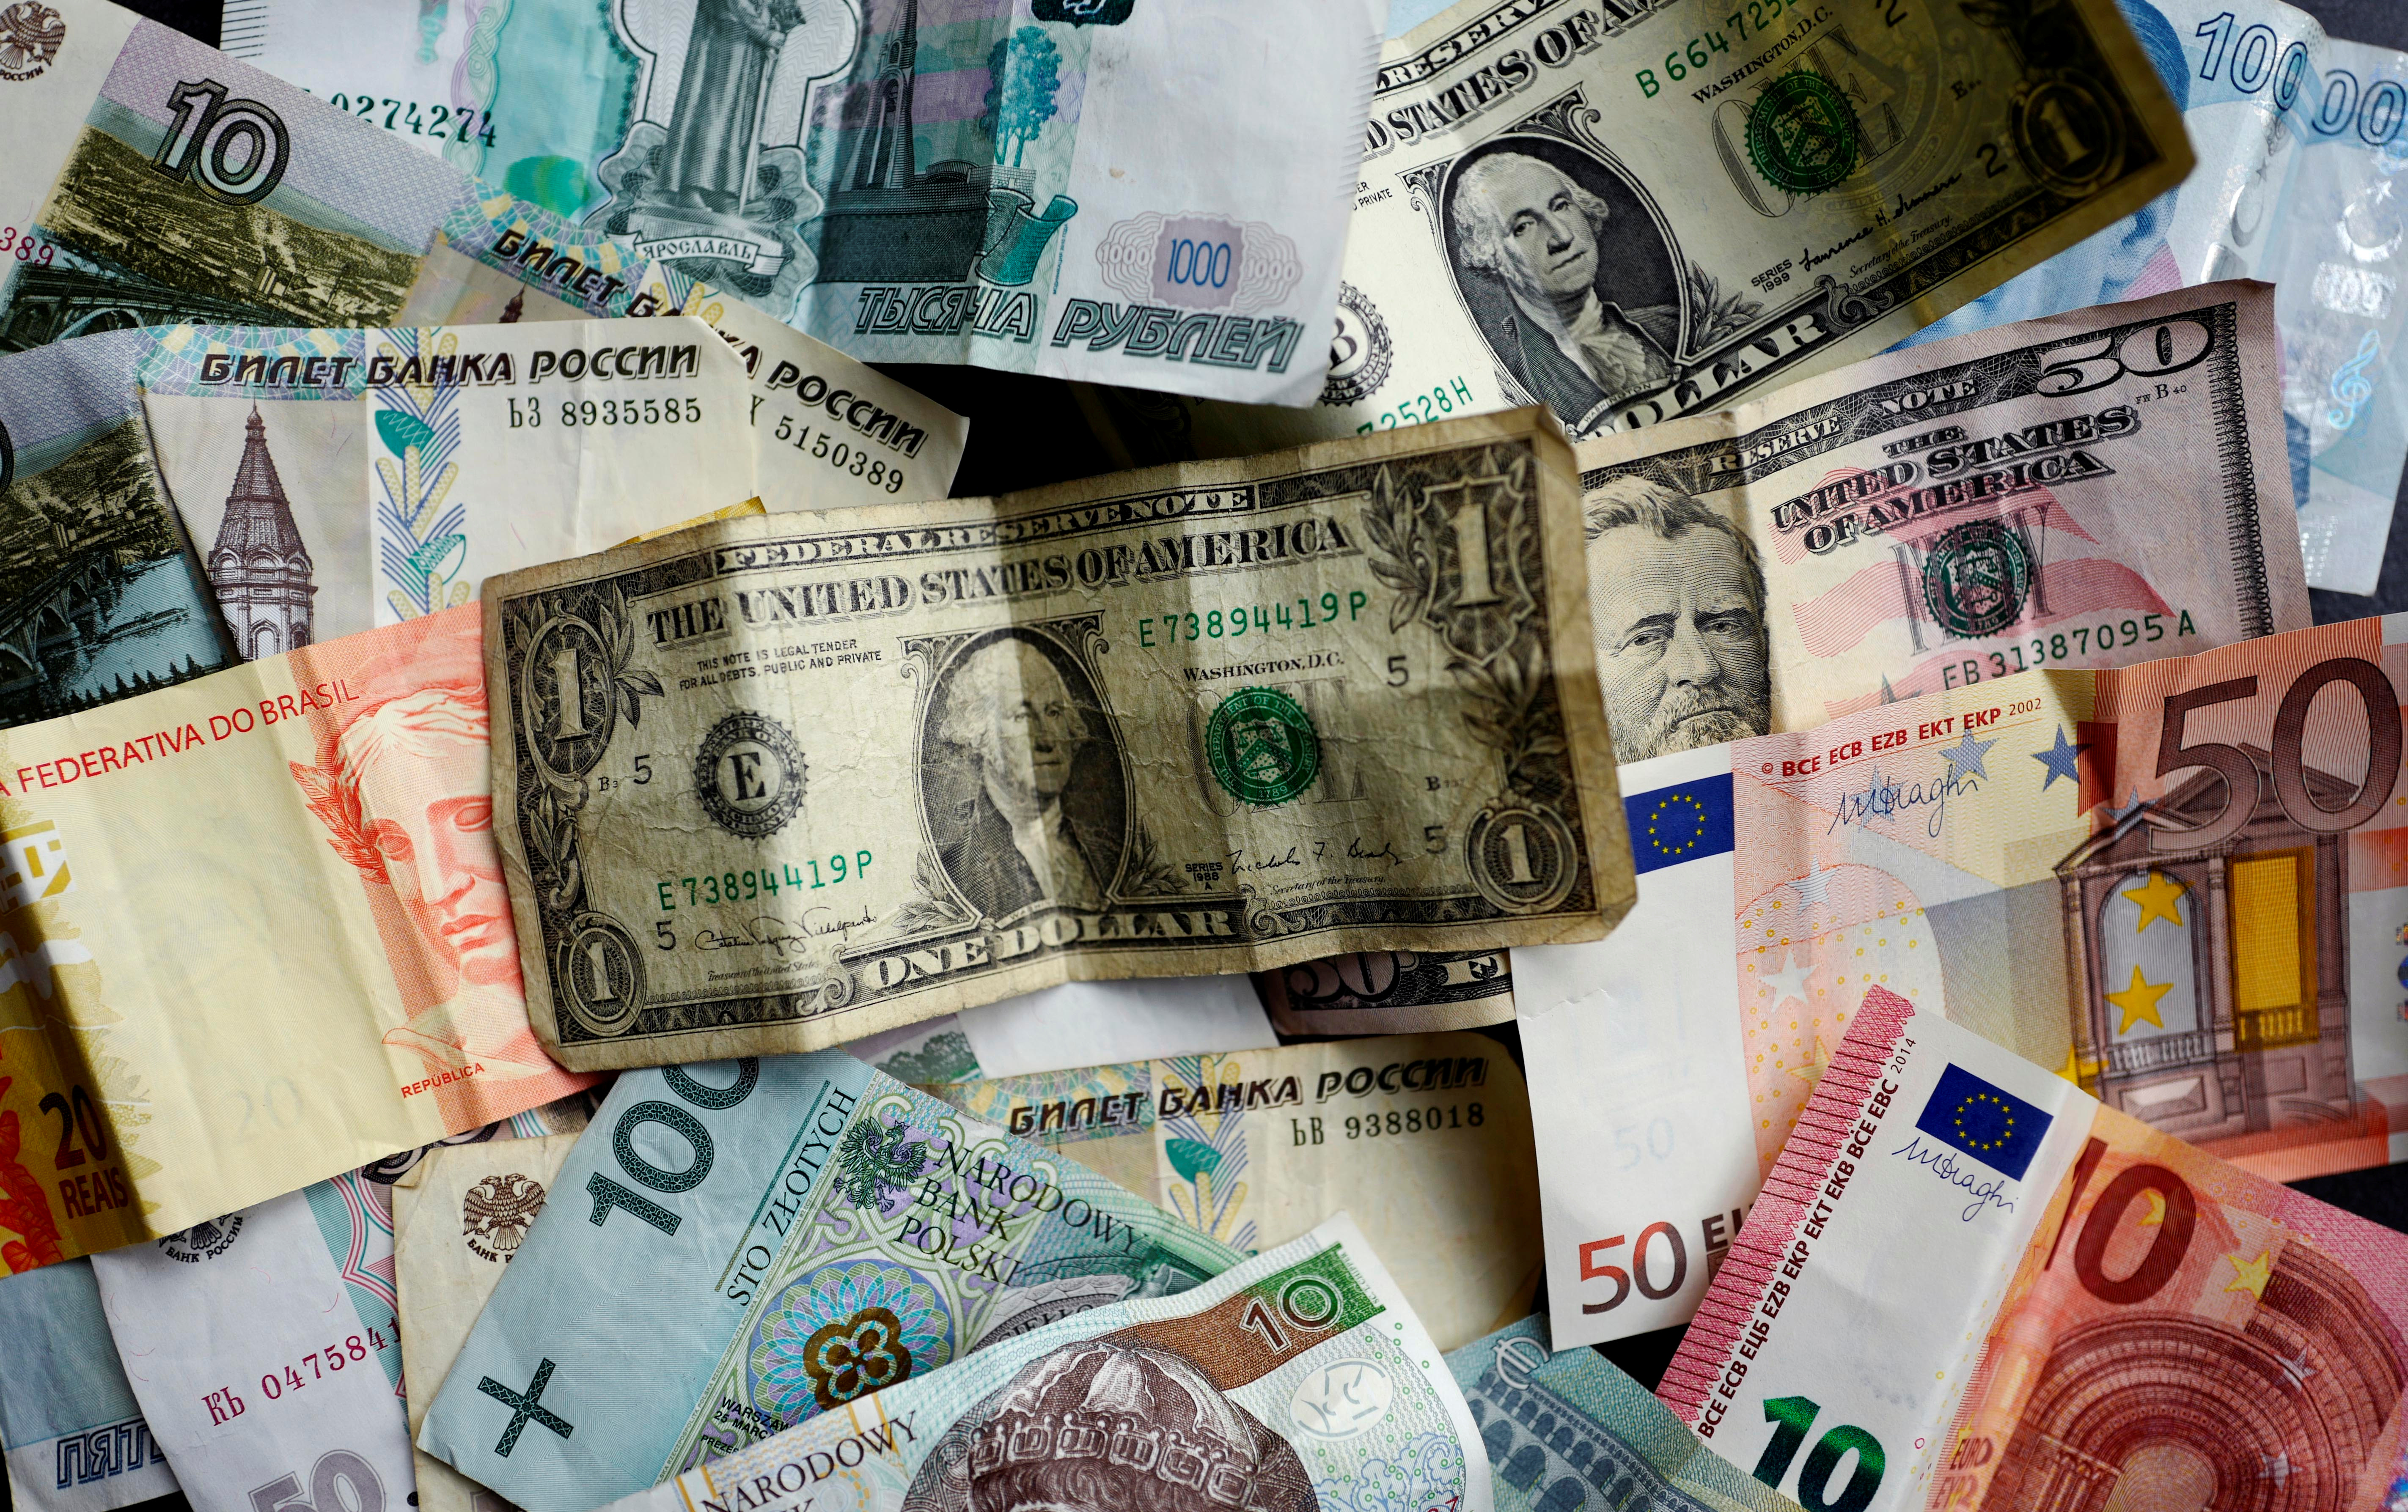 Bank notes of different currencies are photographed in Frankfurt, Germany, in this illustration picture